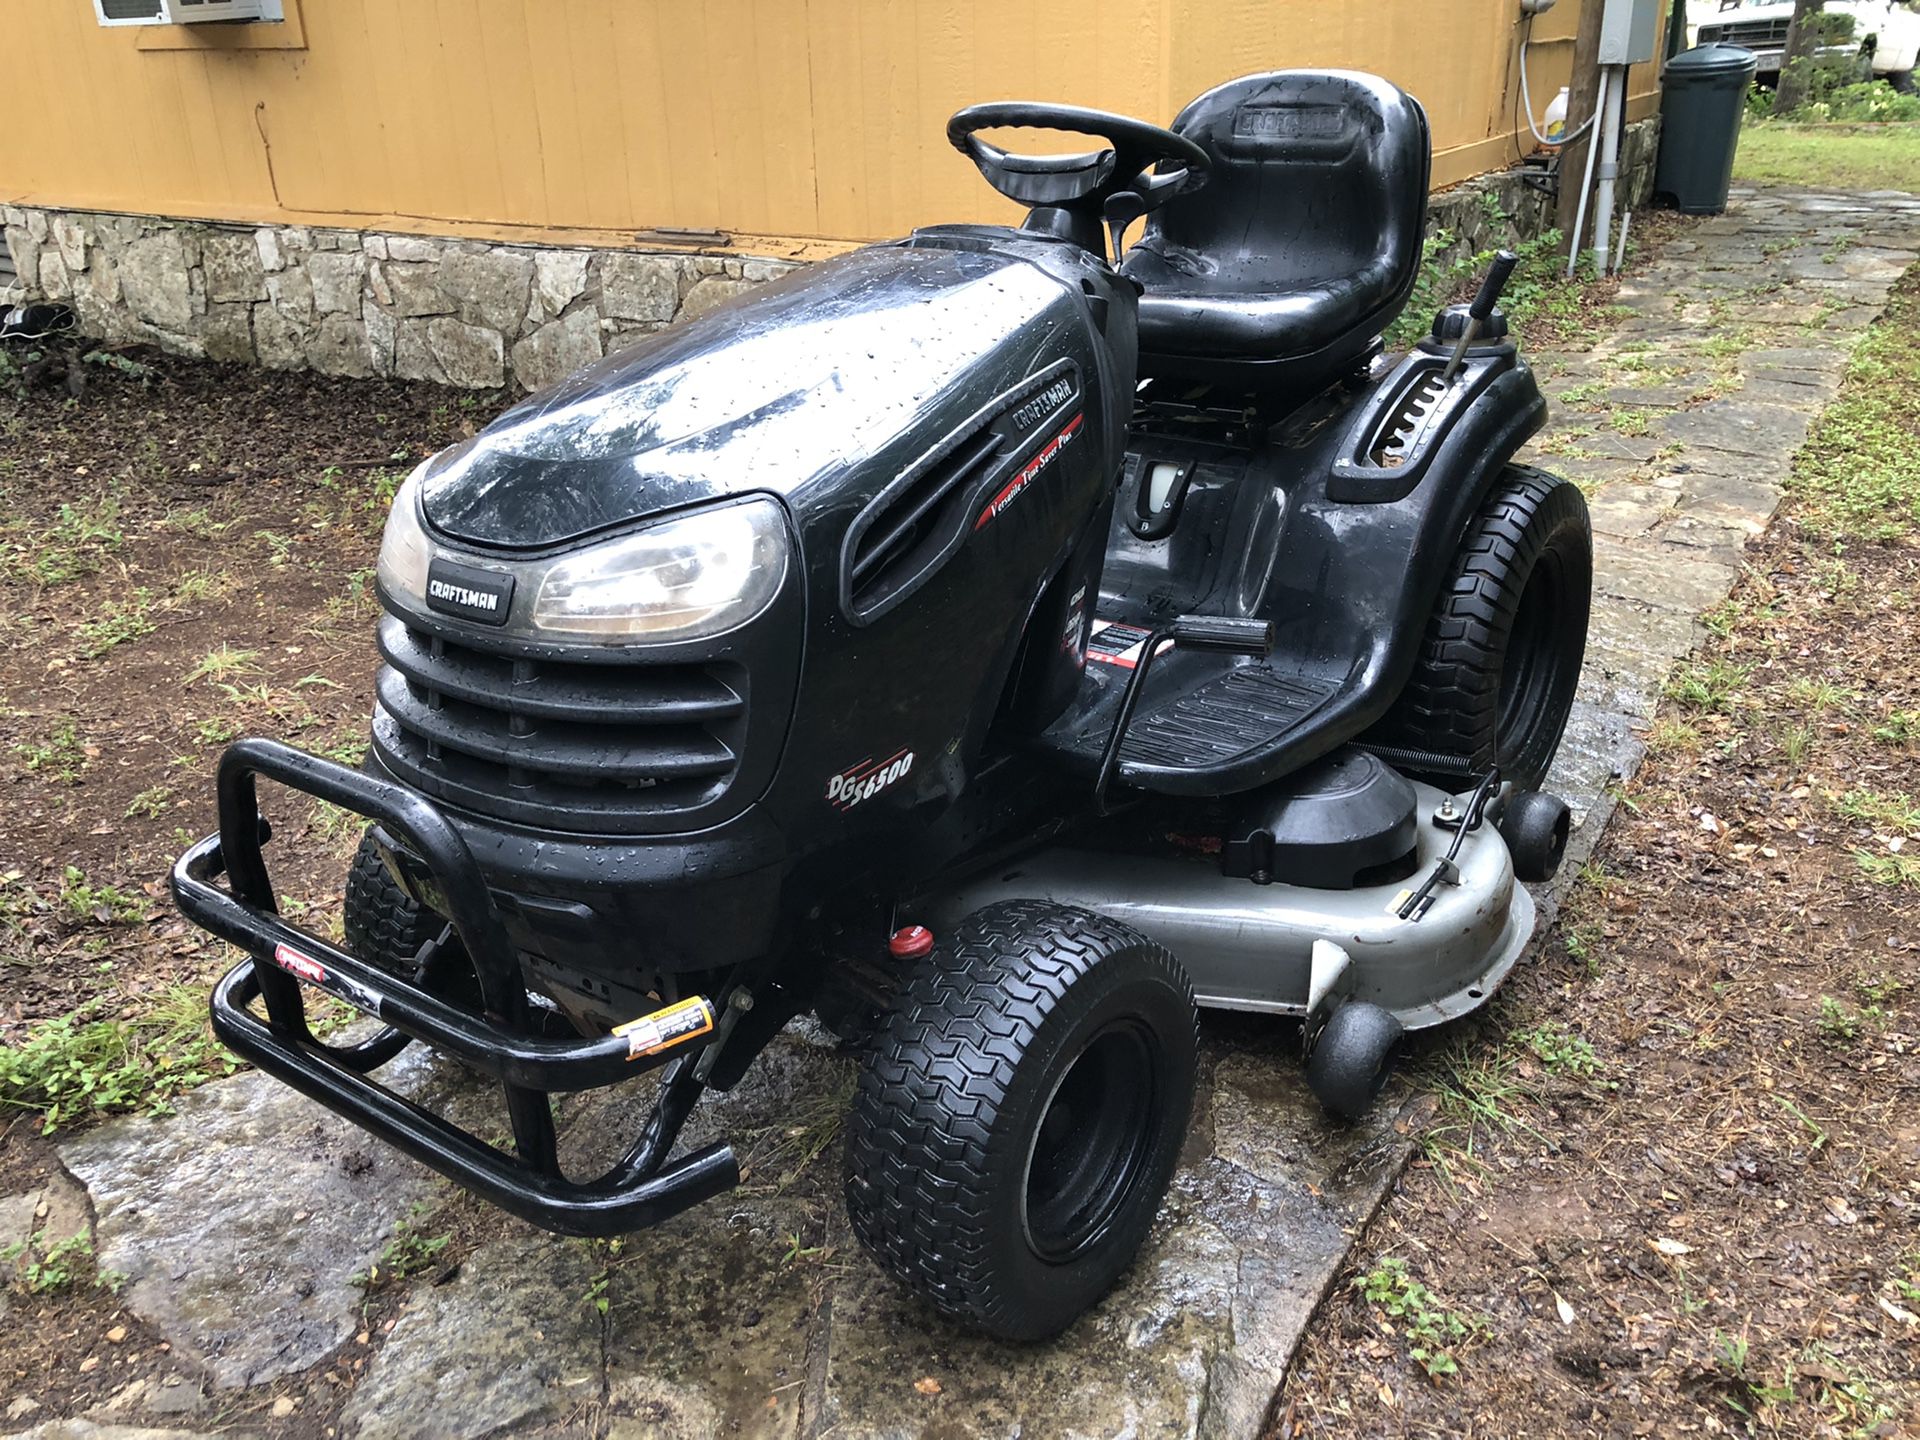 2007 Craftsman DGS 6500 48” Riding Lawn Mower/Lawn Tractor 26hp